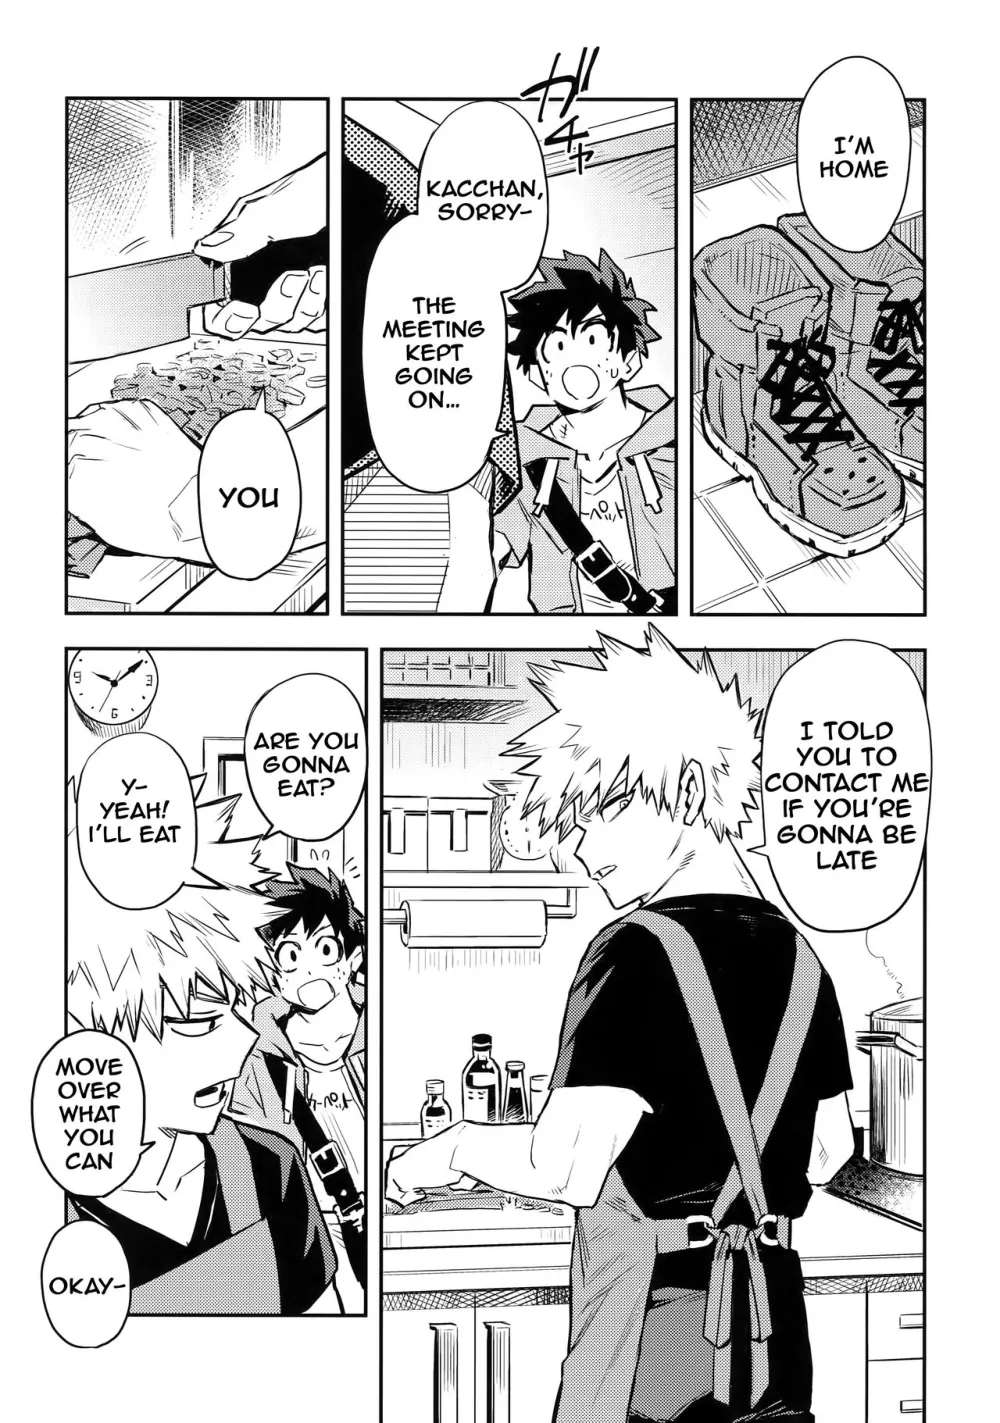 The Battle Between Sick Kacchan and Me - Page 2